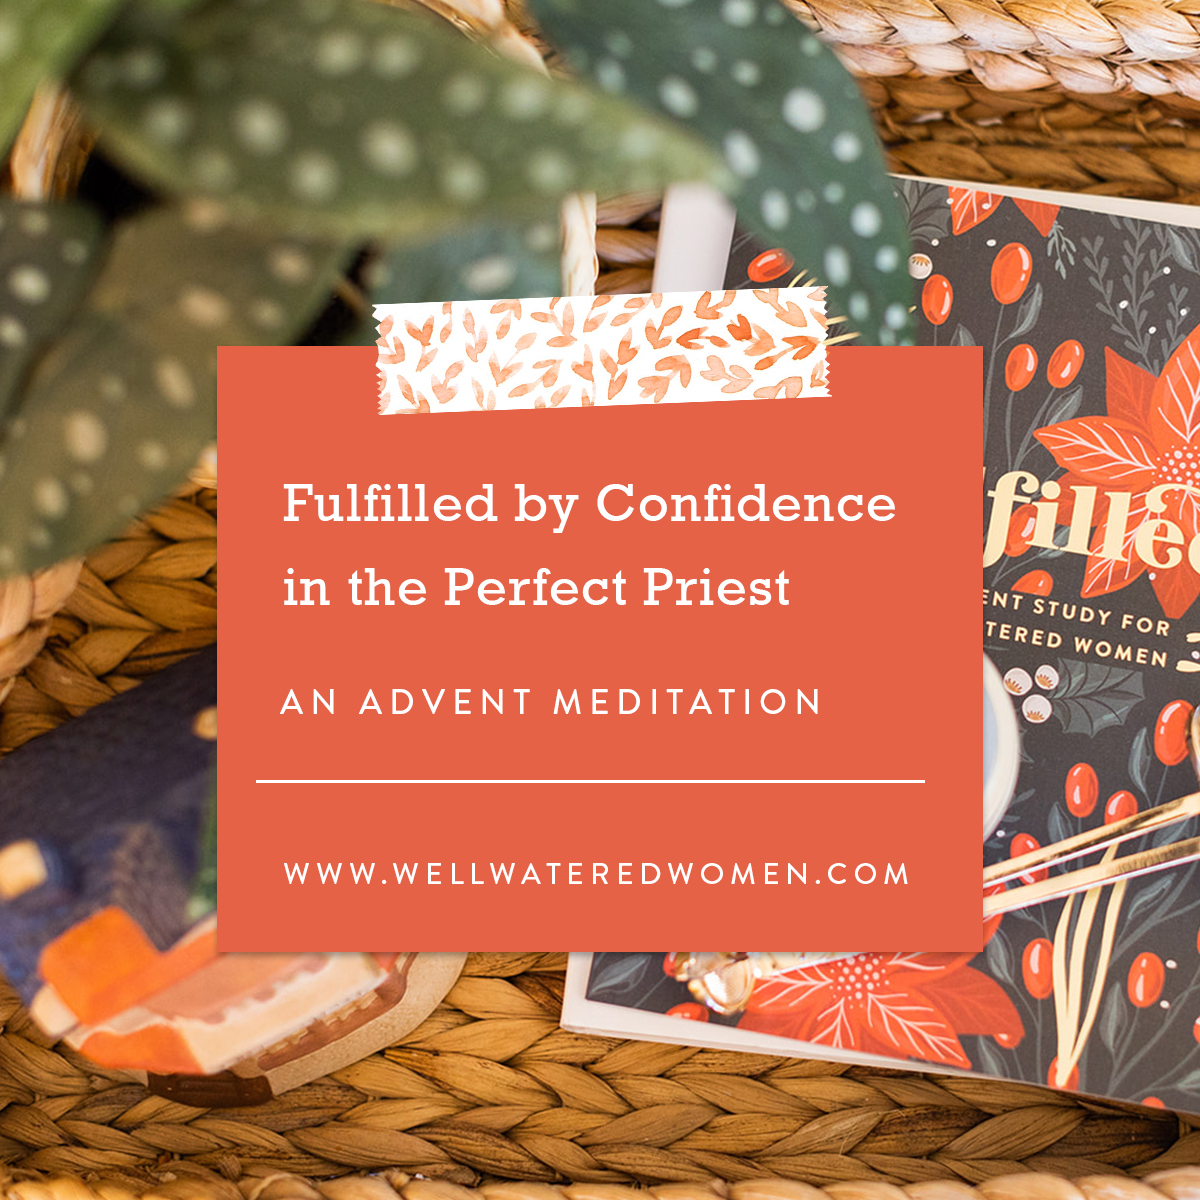 Fulfilled by Confidence in the Perfect Priest, an Advent Meditation from Well-Watered Women